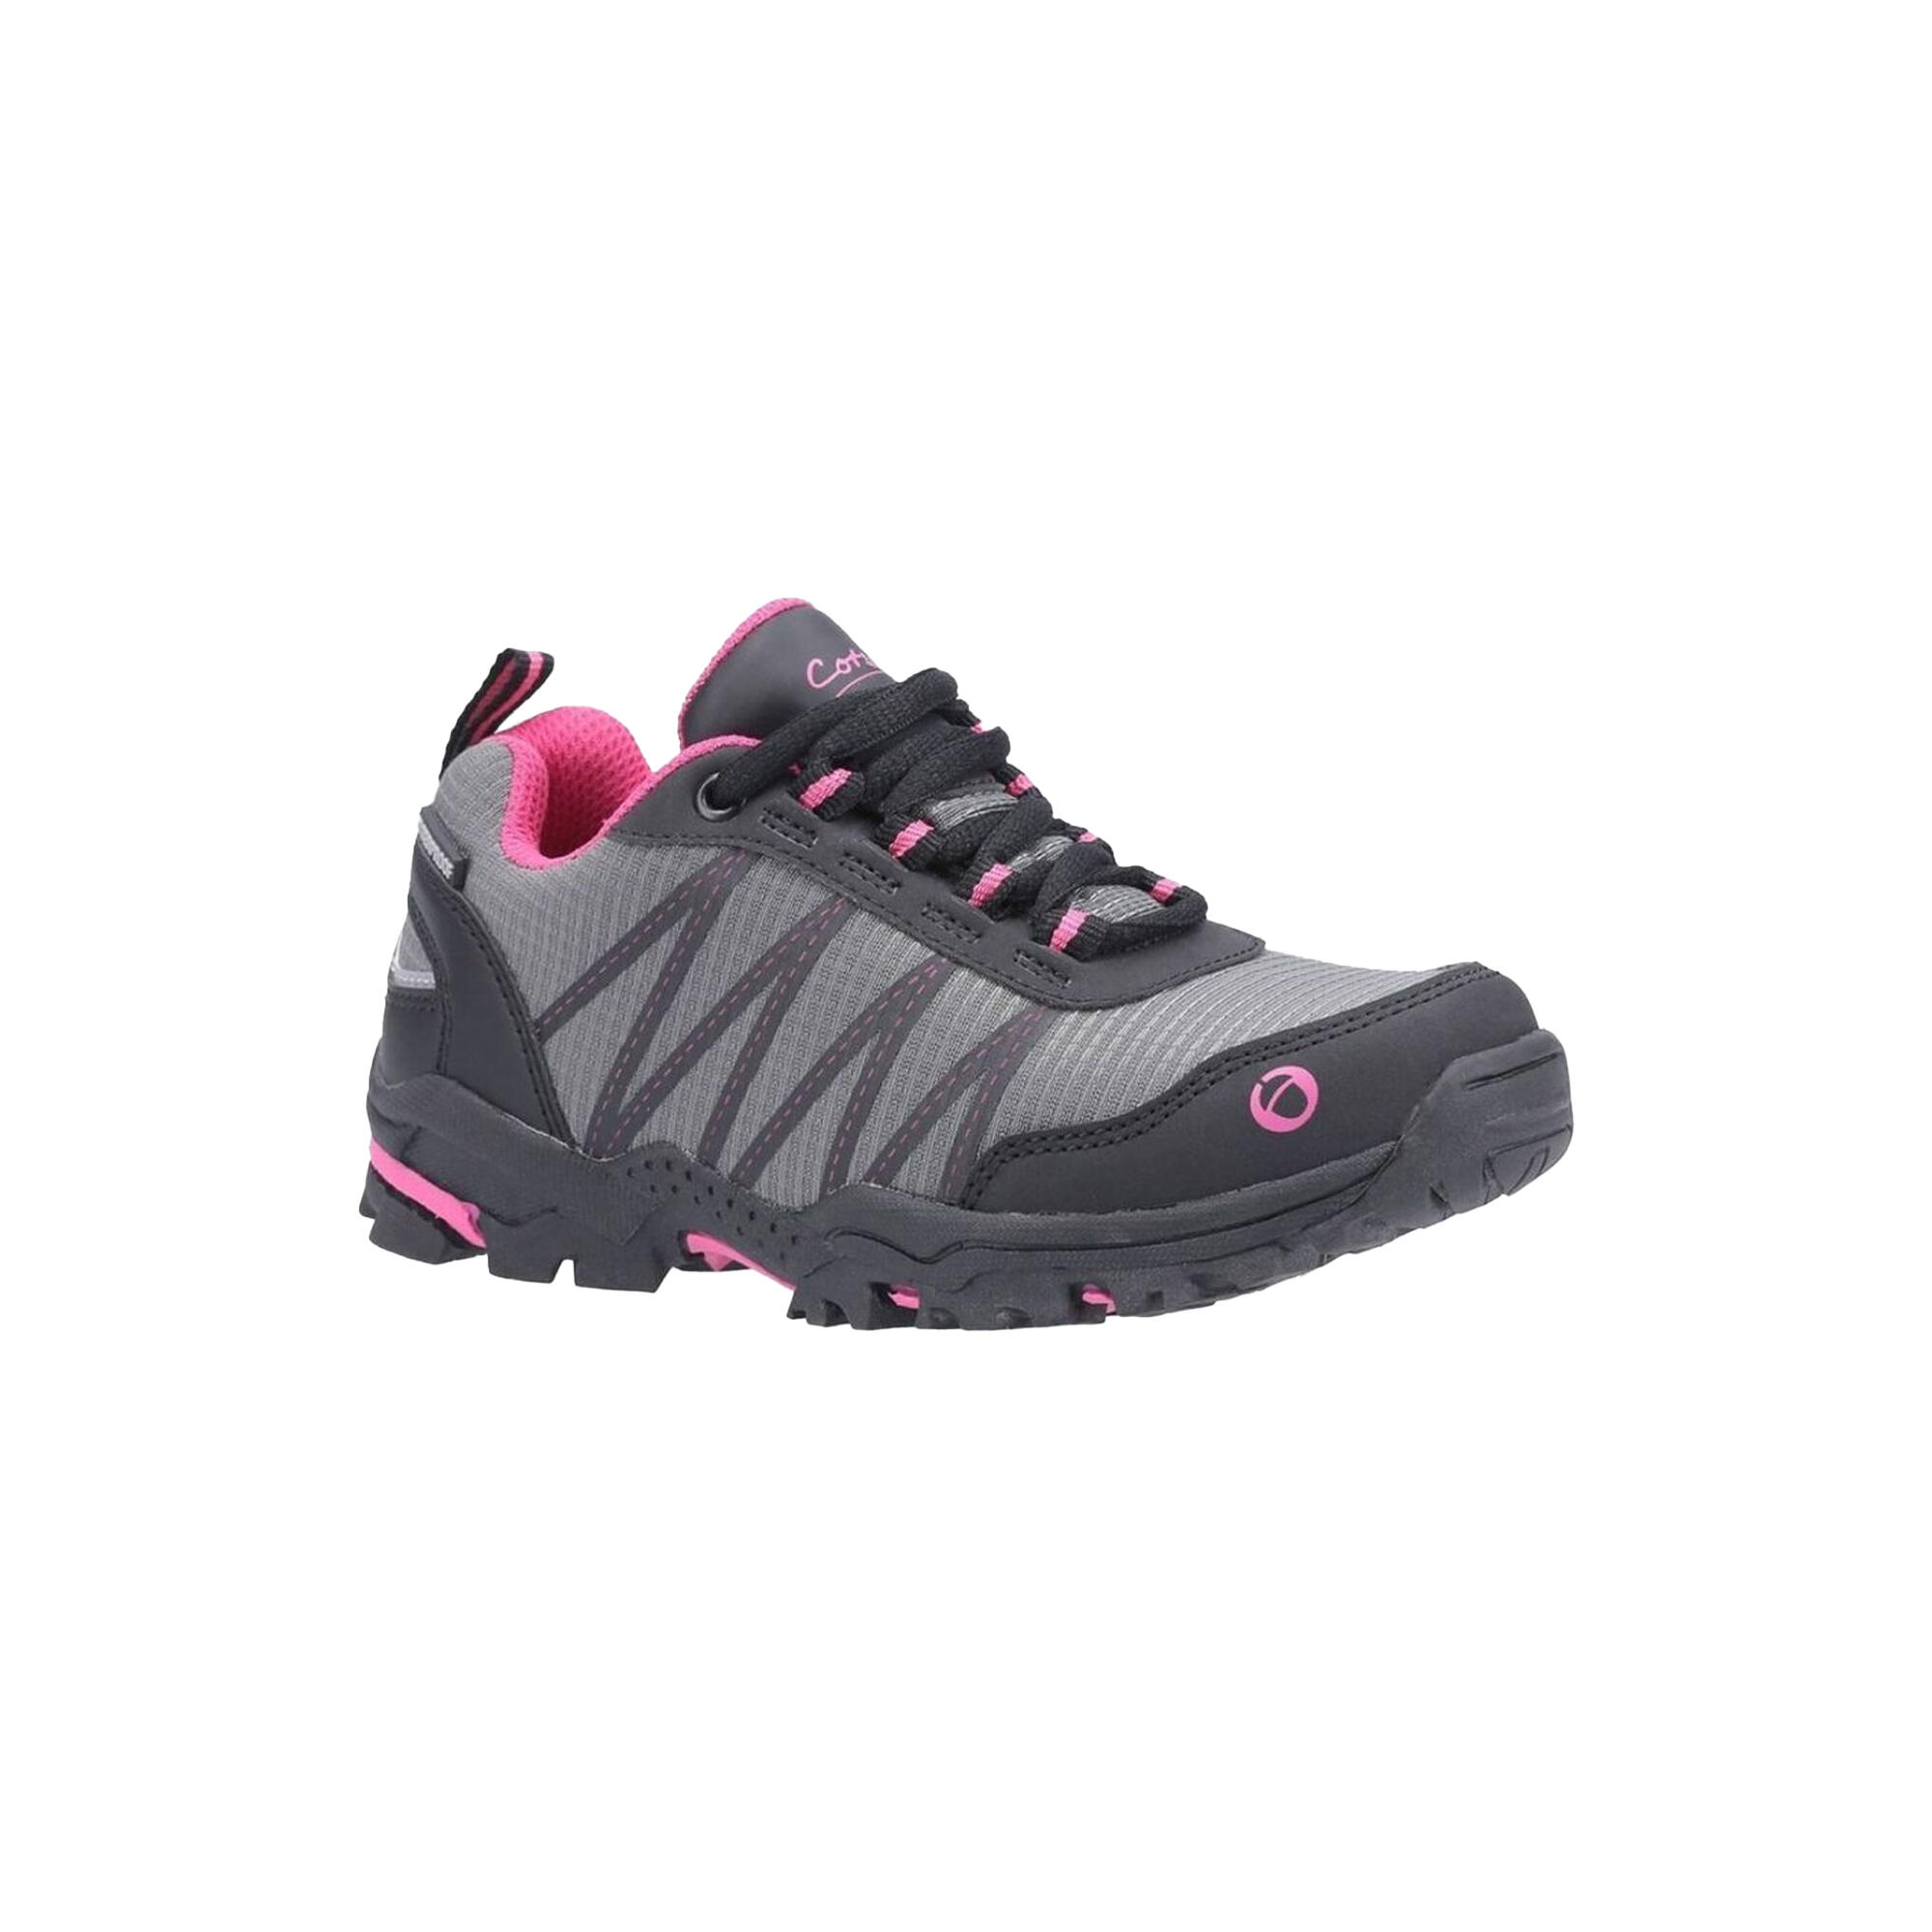 Childrens/Kids Little Dean Lace Up Hiking Waterproof Trainer (Pink/Grey) 1/5